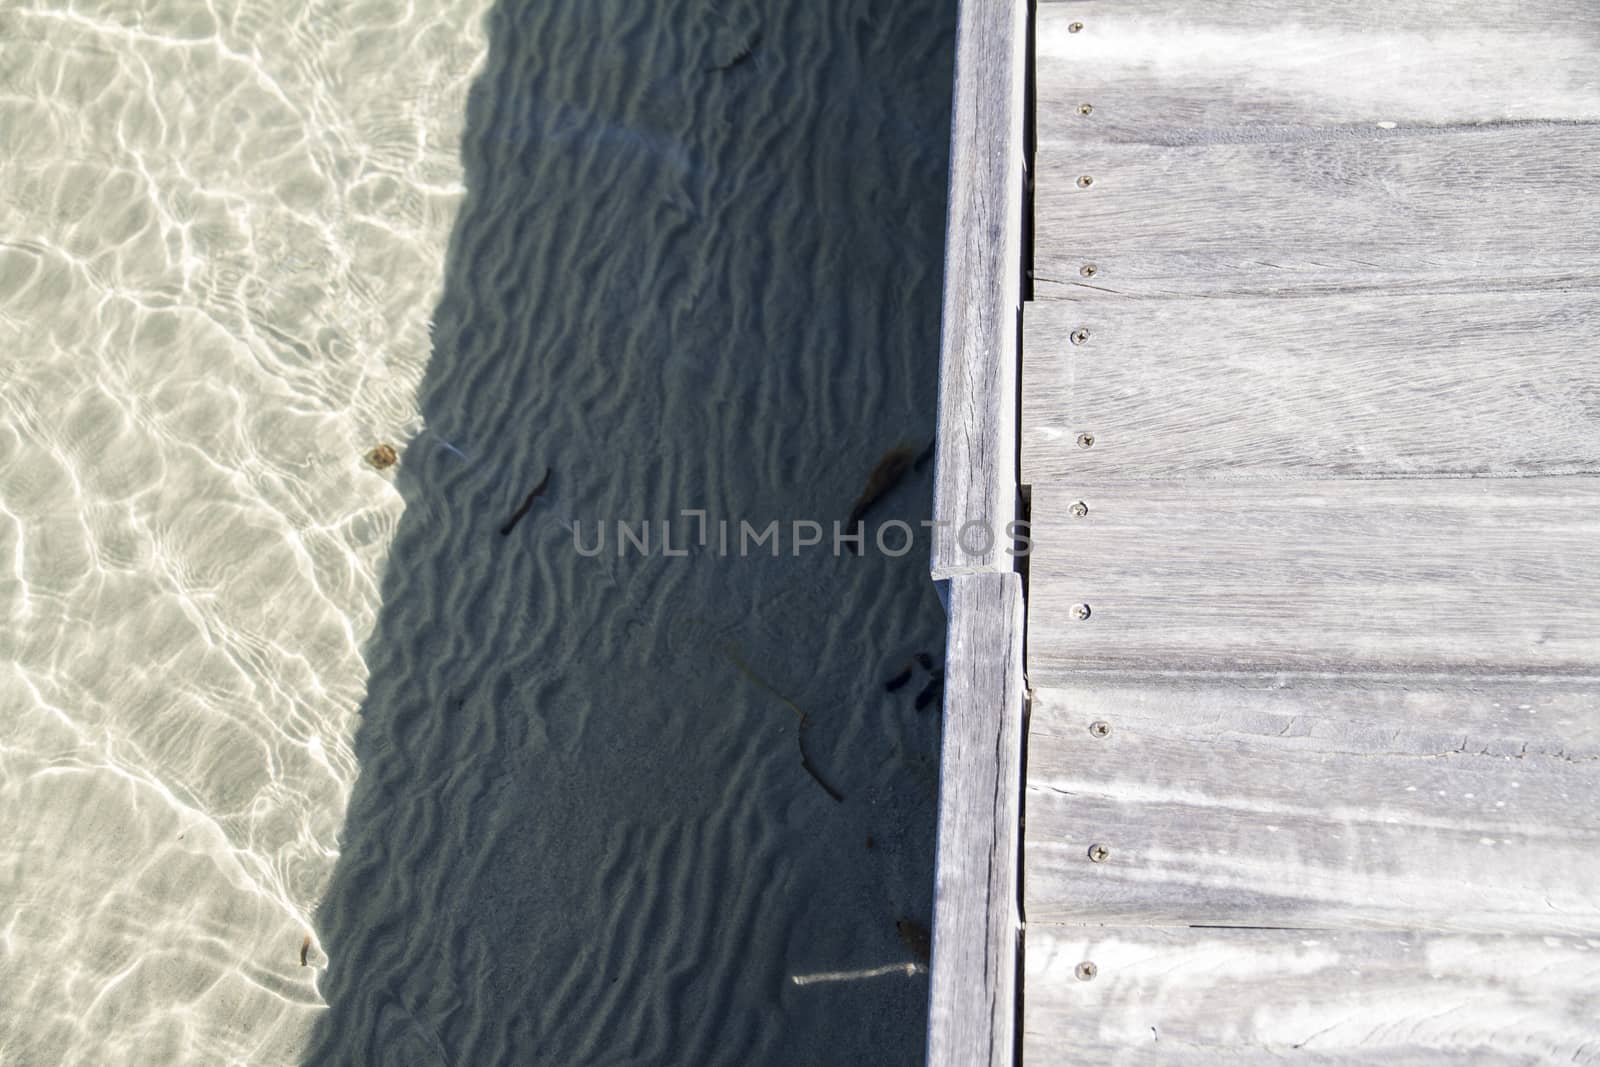 Wooden boardwalk on transparent sea water with sand on bottom. Geometric composition with shadows play.